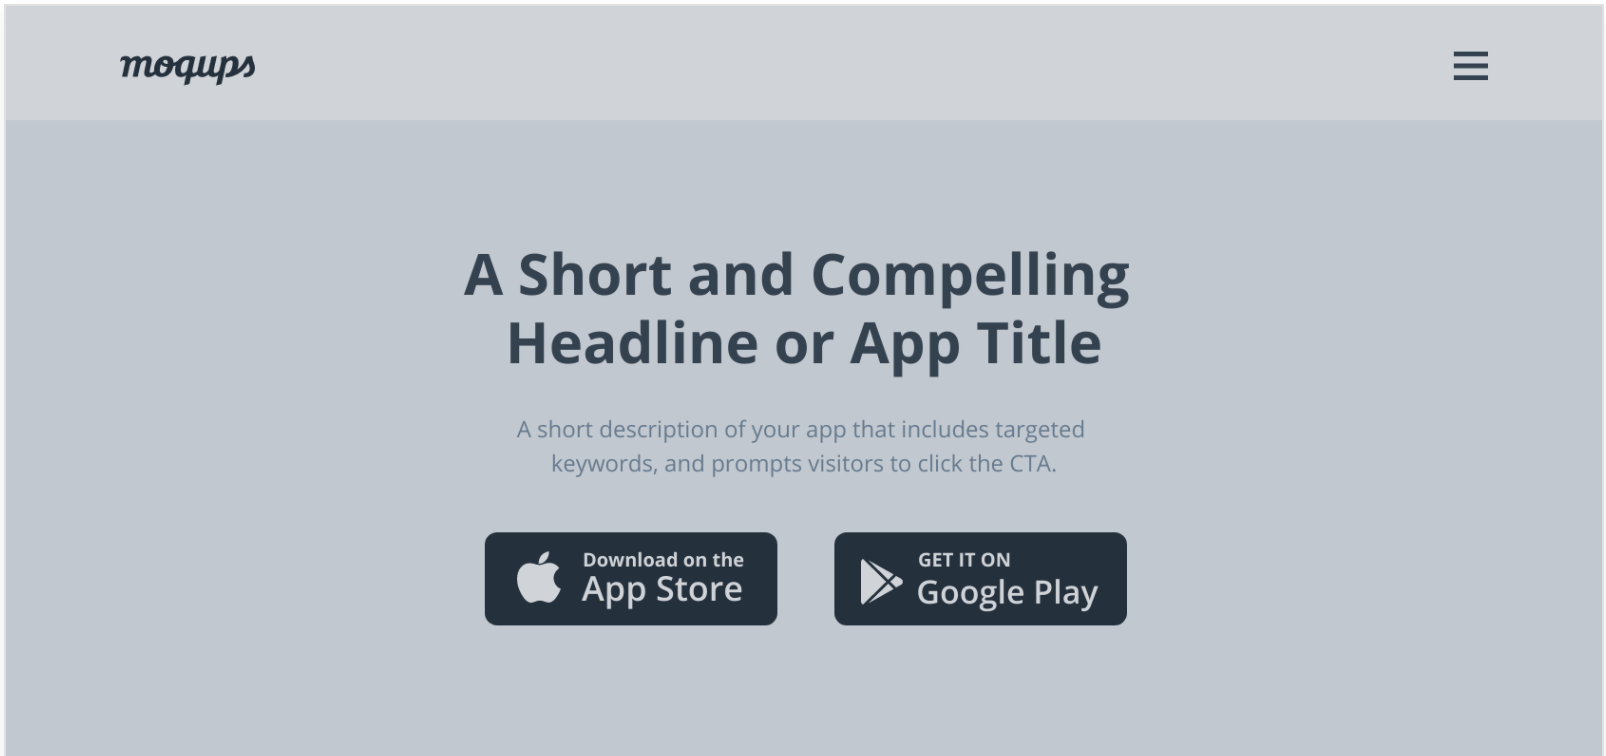 Mobile app landing page template